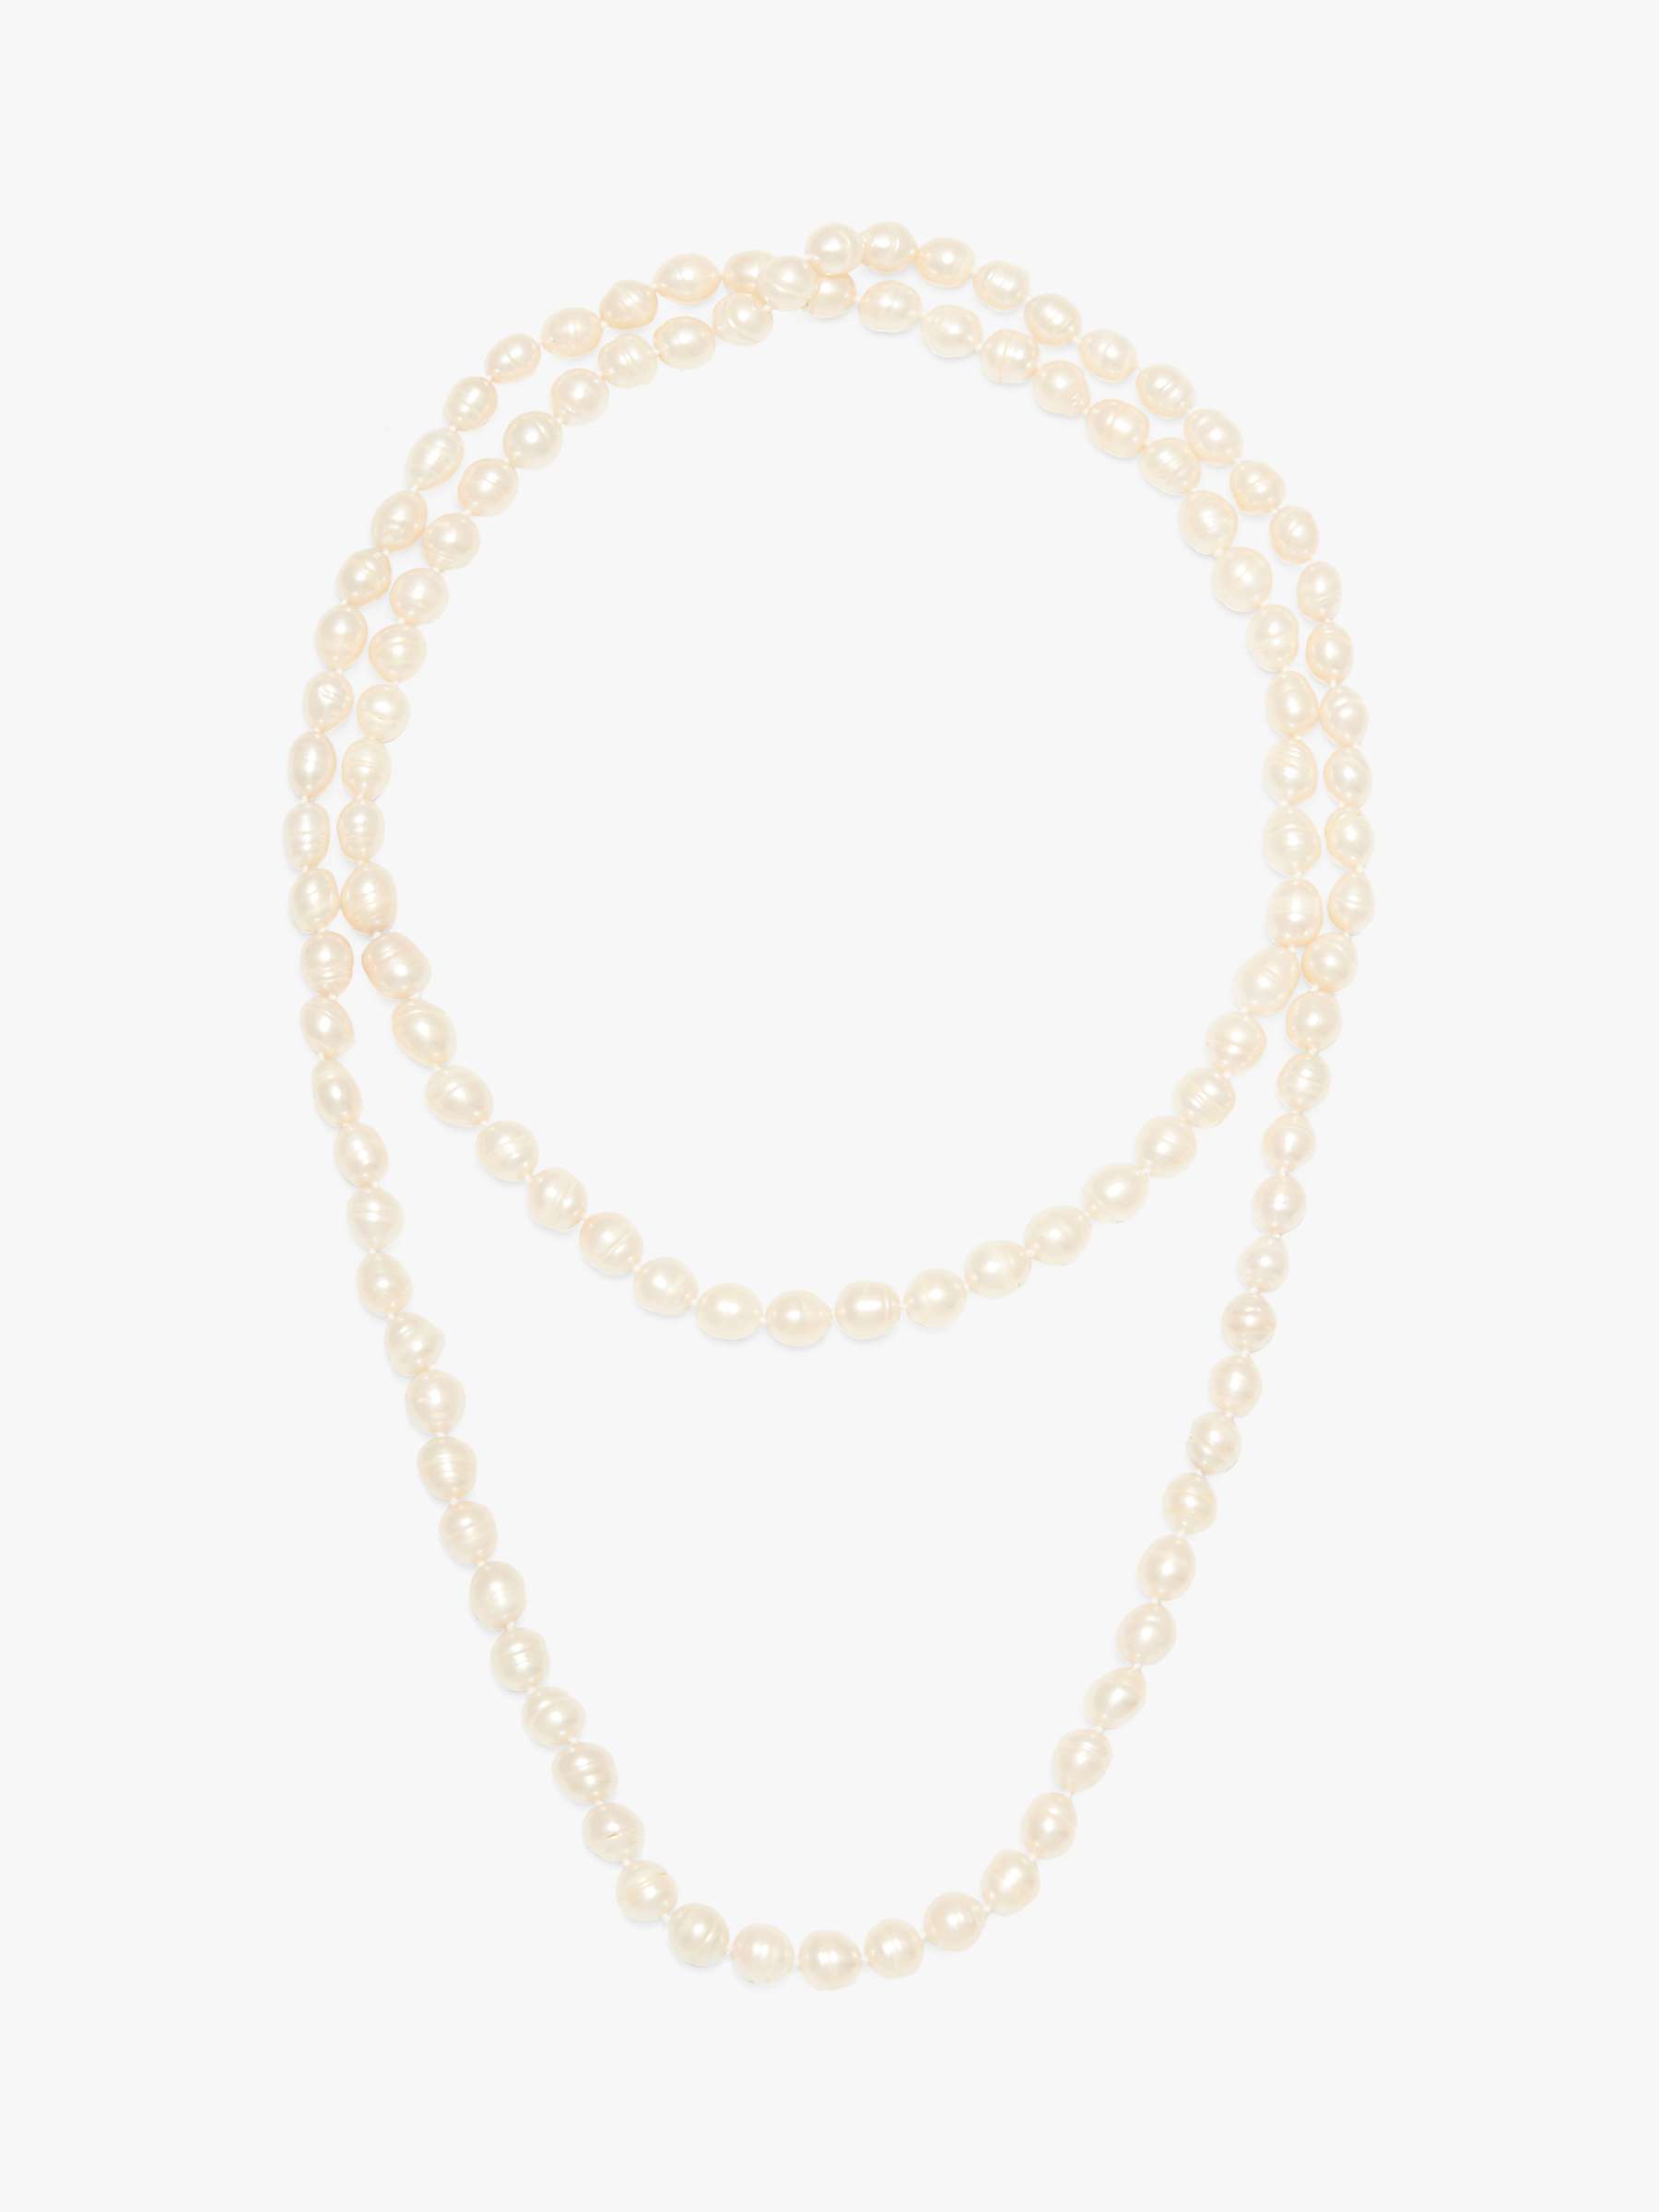 Buy A B Davis Opera Length Freshwater Pearl Necklace, White Online at johnlewis.com